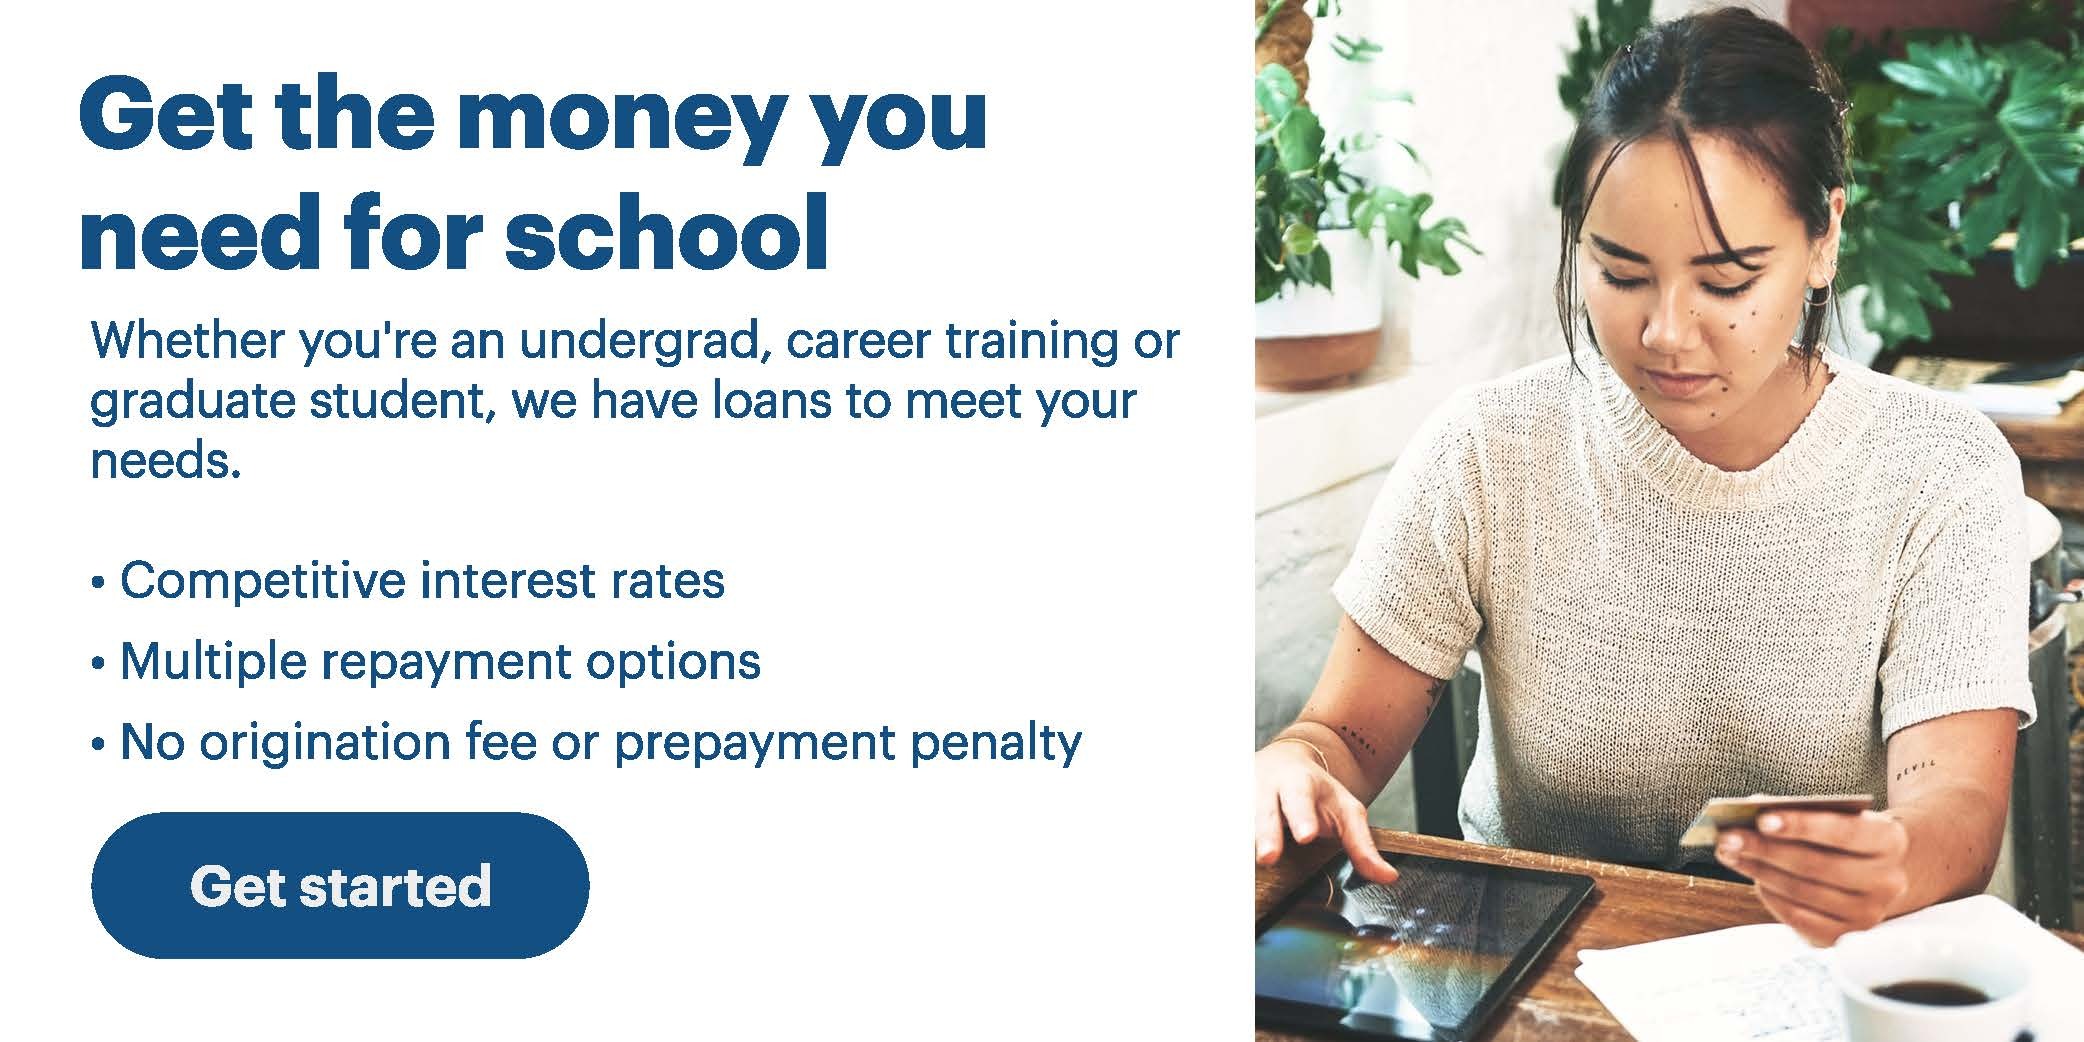 Olathe Private Student Loans by SallieMae for Olathe Students in Olathe, KS